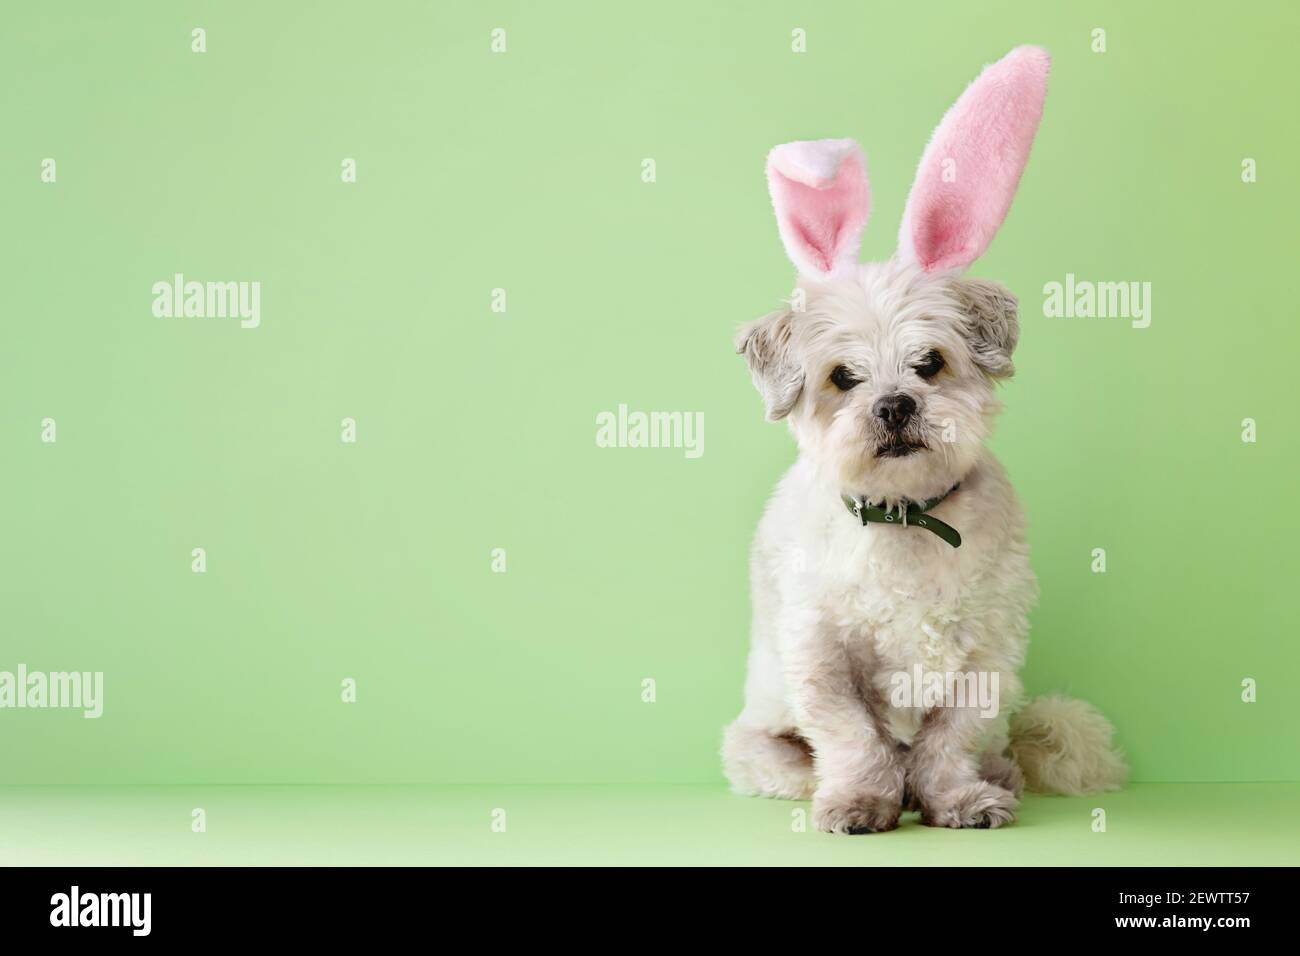 Small white dog dressed up for Easter Stock Photo